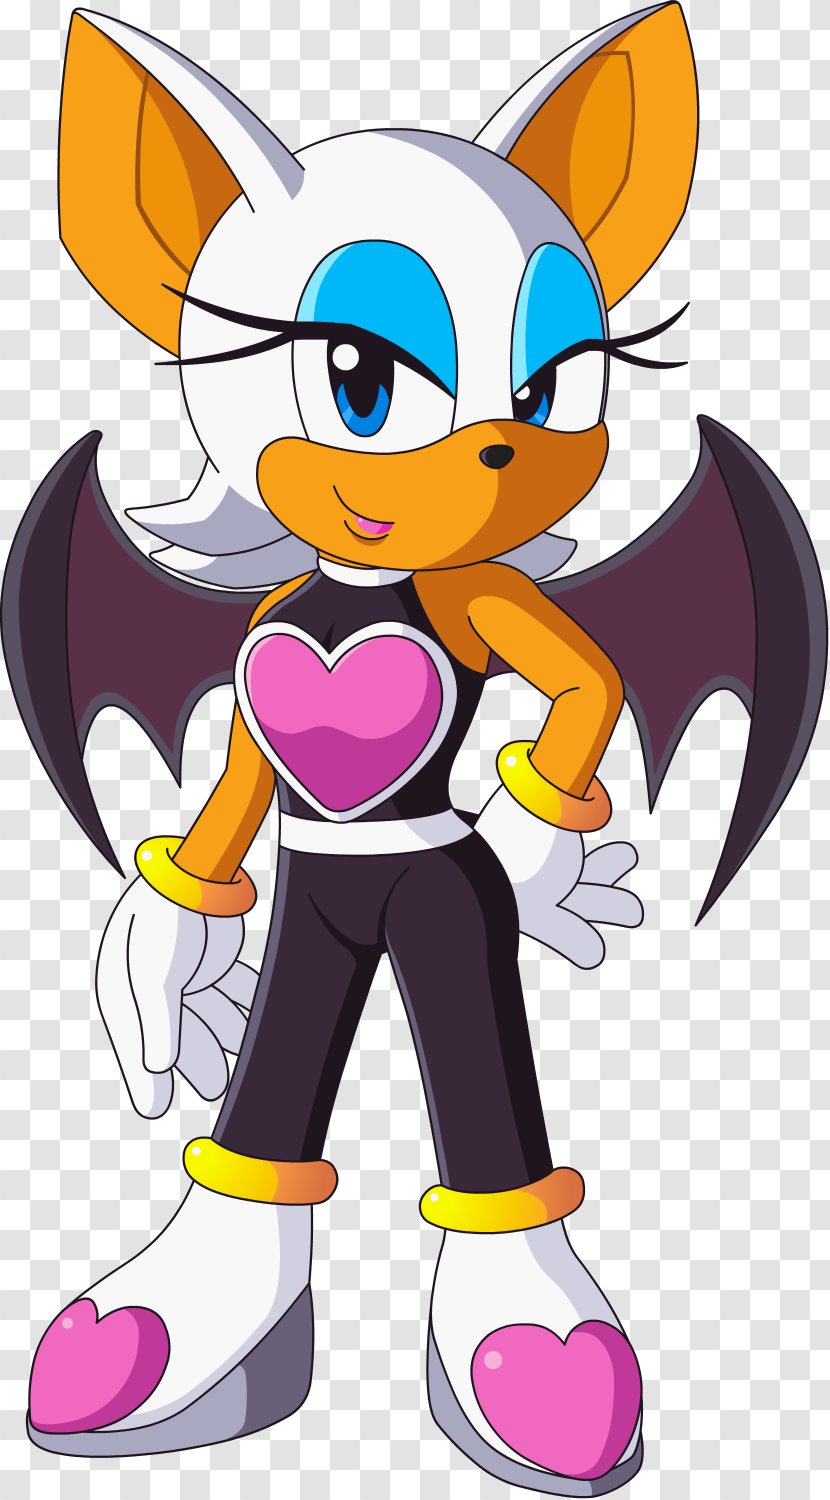 Rouge The Bat Mario & Sonic At Olympic Games Wikia Character - Cartoon Transparent PNG